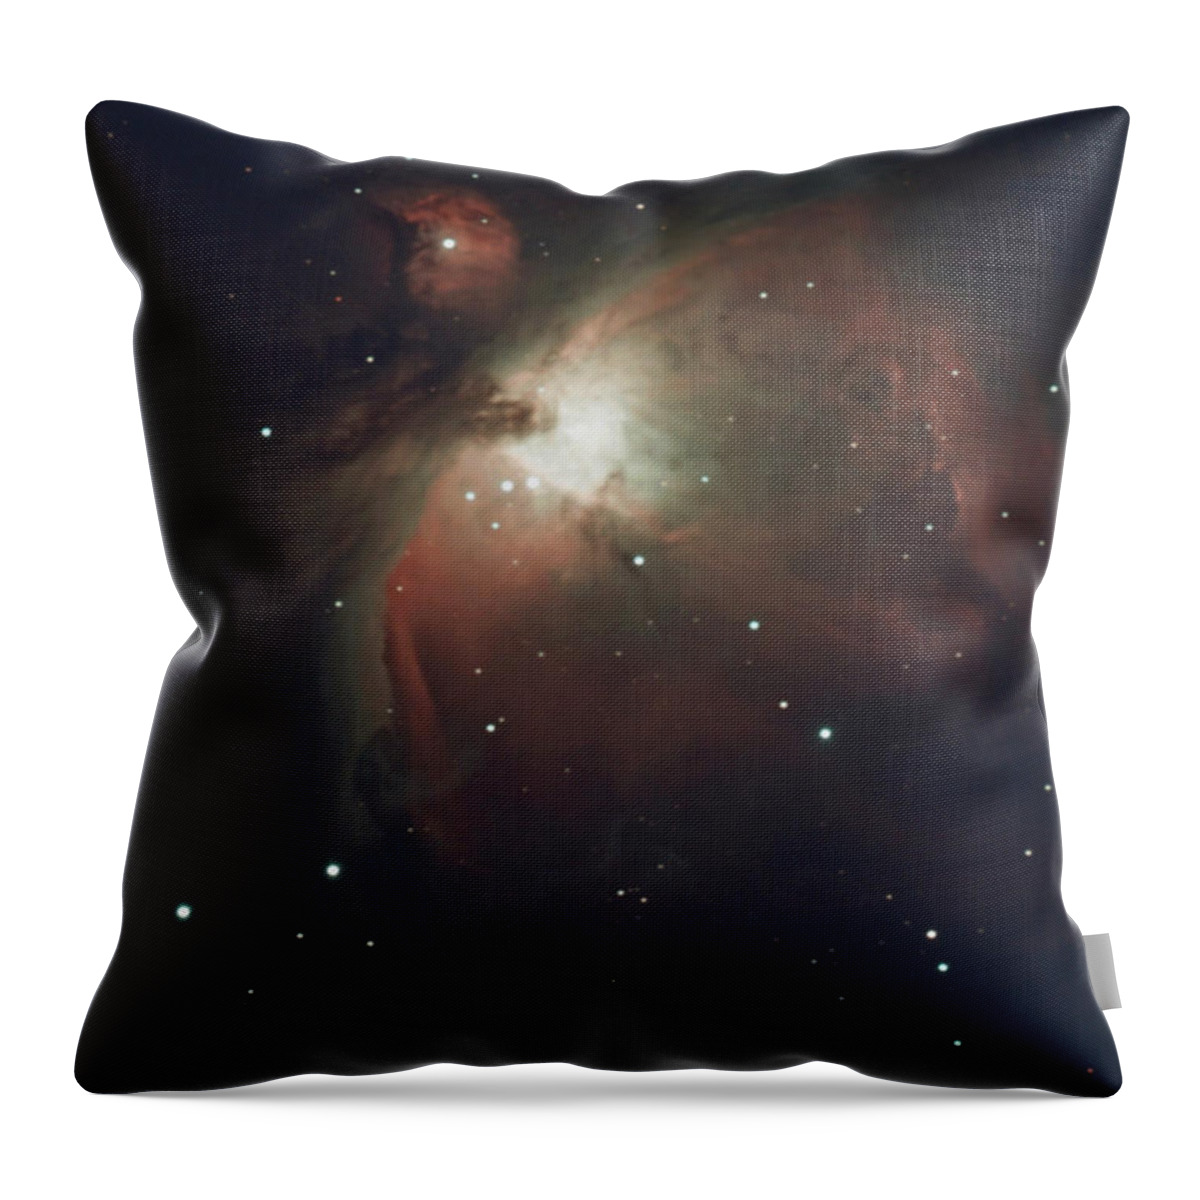 Orion Nebula M42 Throw Pillow featuring the photograph Looking Up to the Night Sky by fototaker Tony